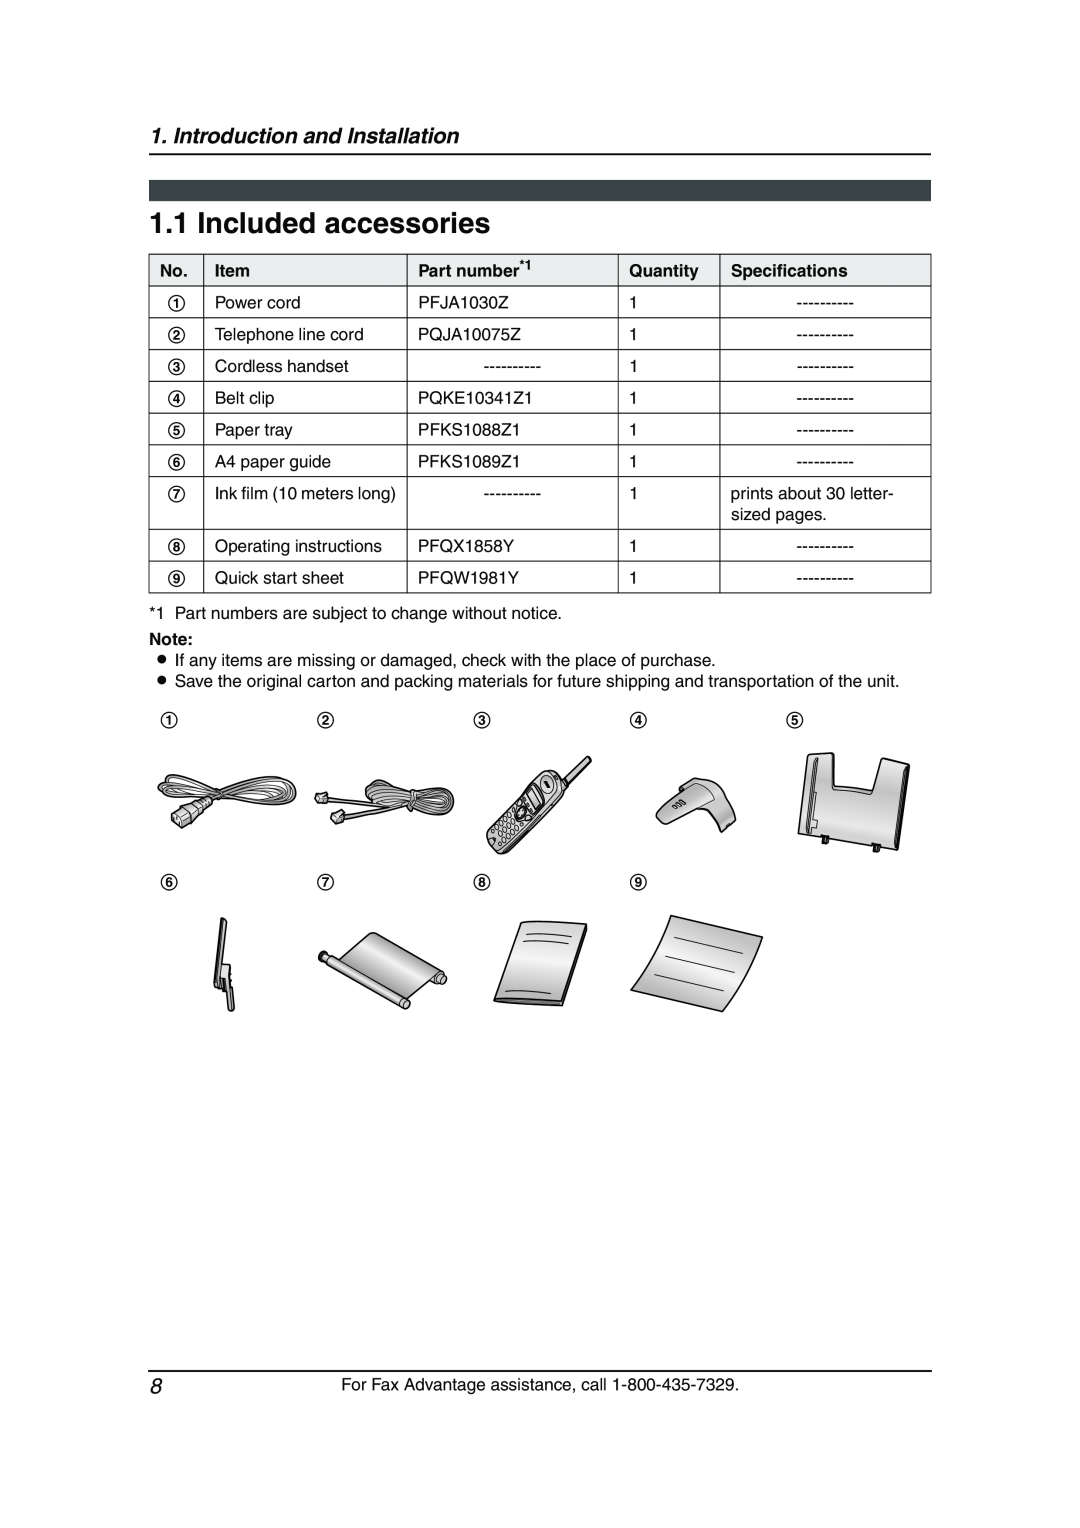 Panasonic KX-FPG376, KX-FPG377 manual Included accessories, Introduction and Installation 